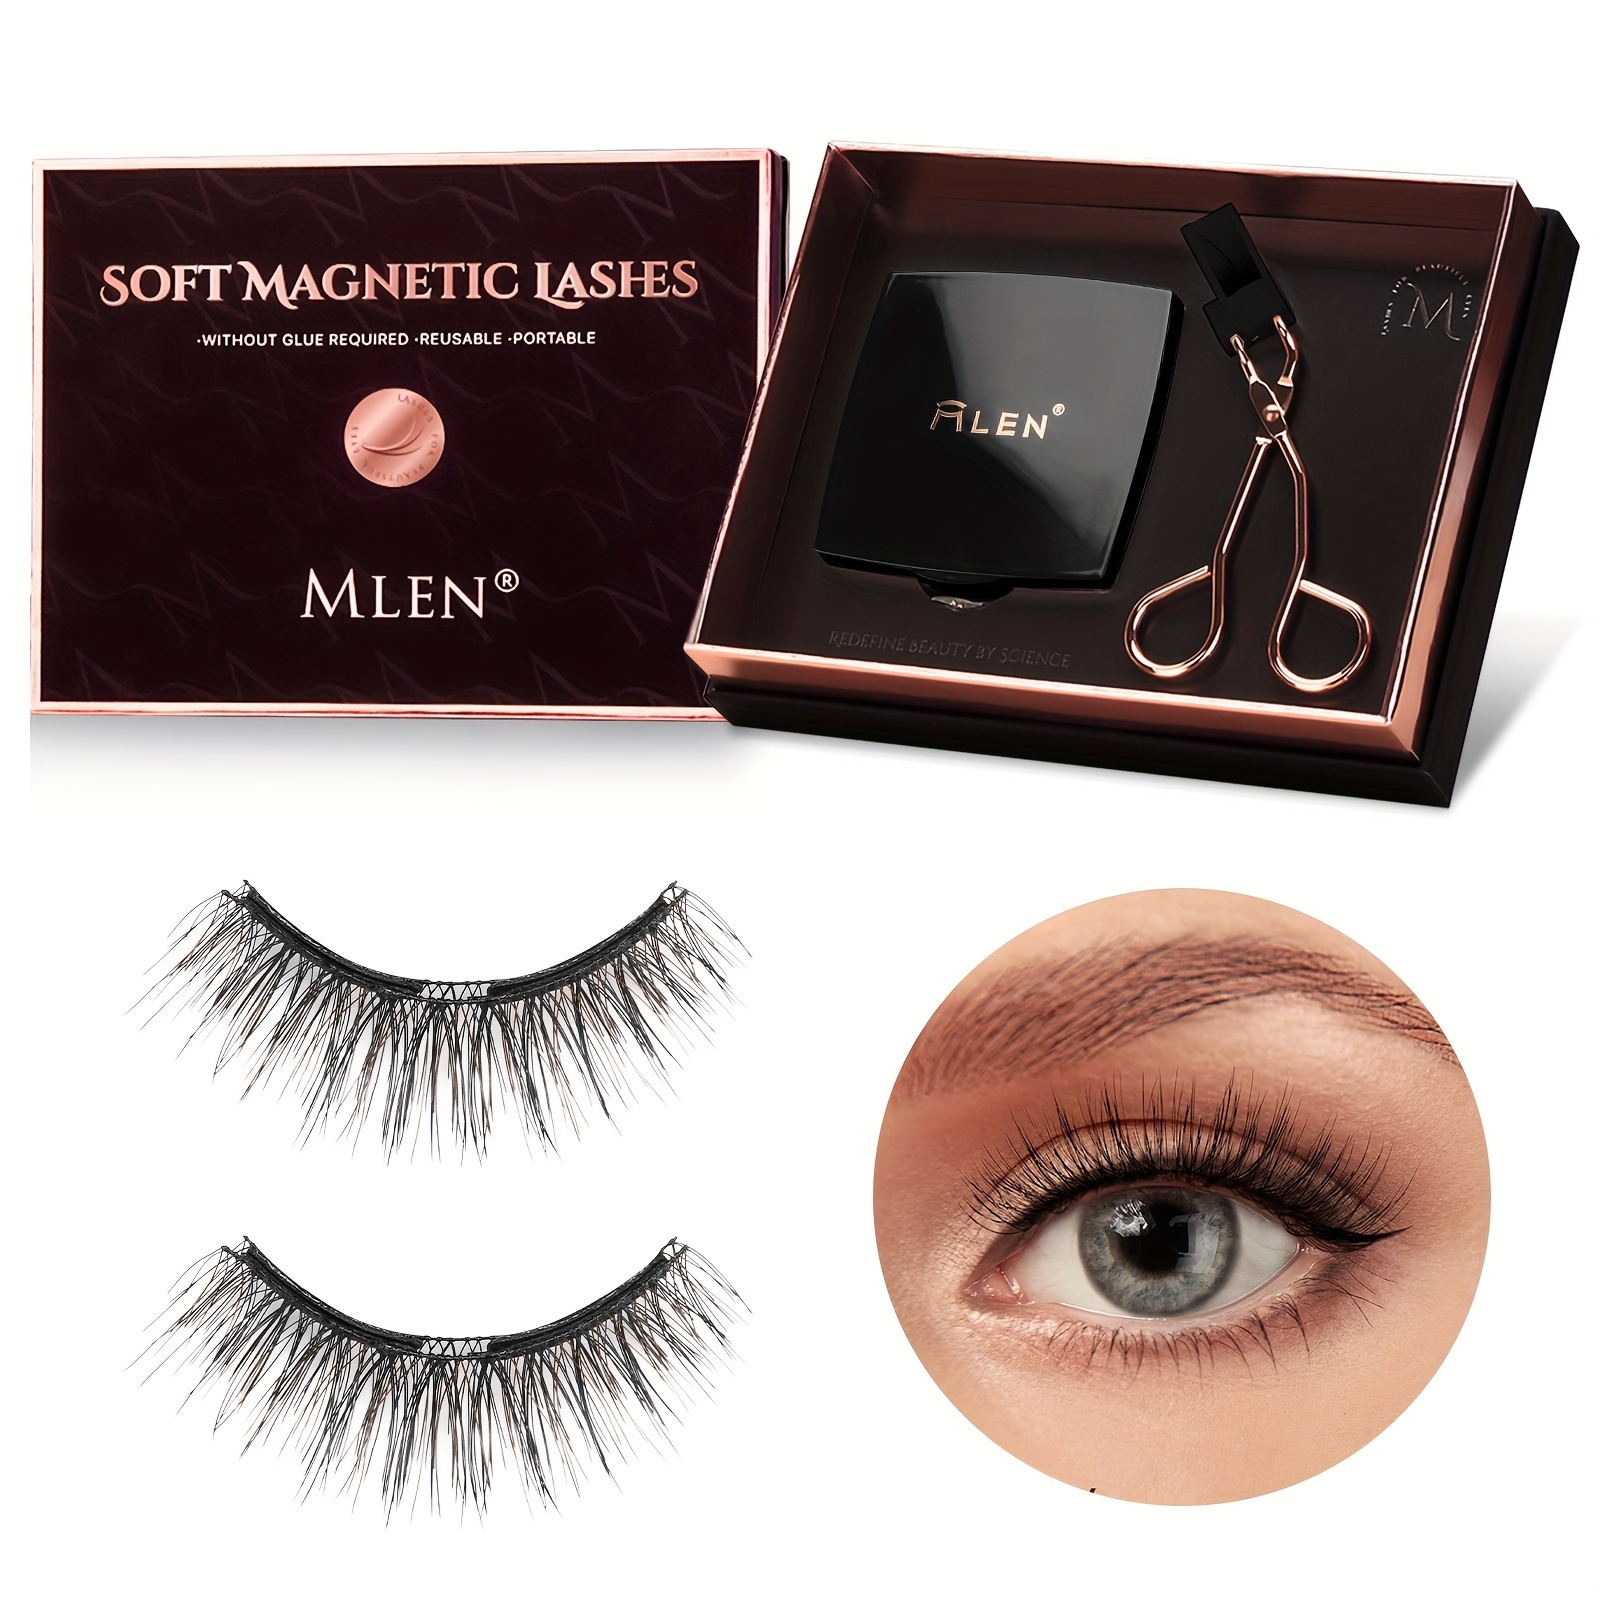 

Mlen Soft Magnetic Eyelashes Set, Reusable, Easy-to-apply With Magnetic Eyeliner, Natural Look, Glue-free Design, With Applicator Tool And Mirror, Portable Case